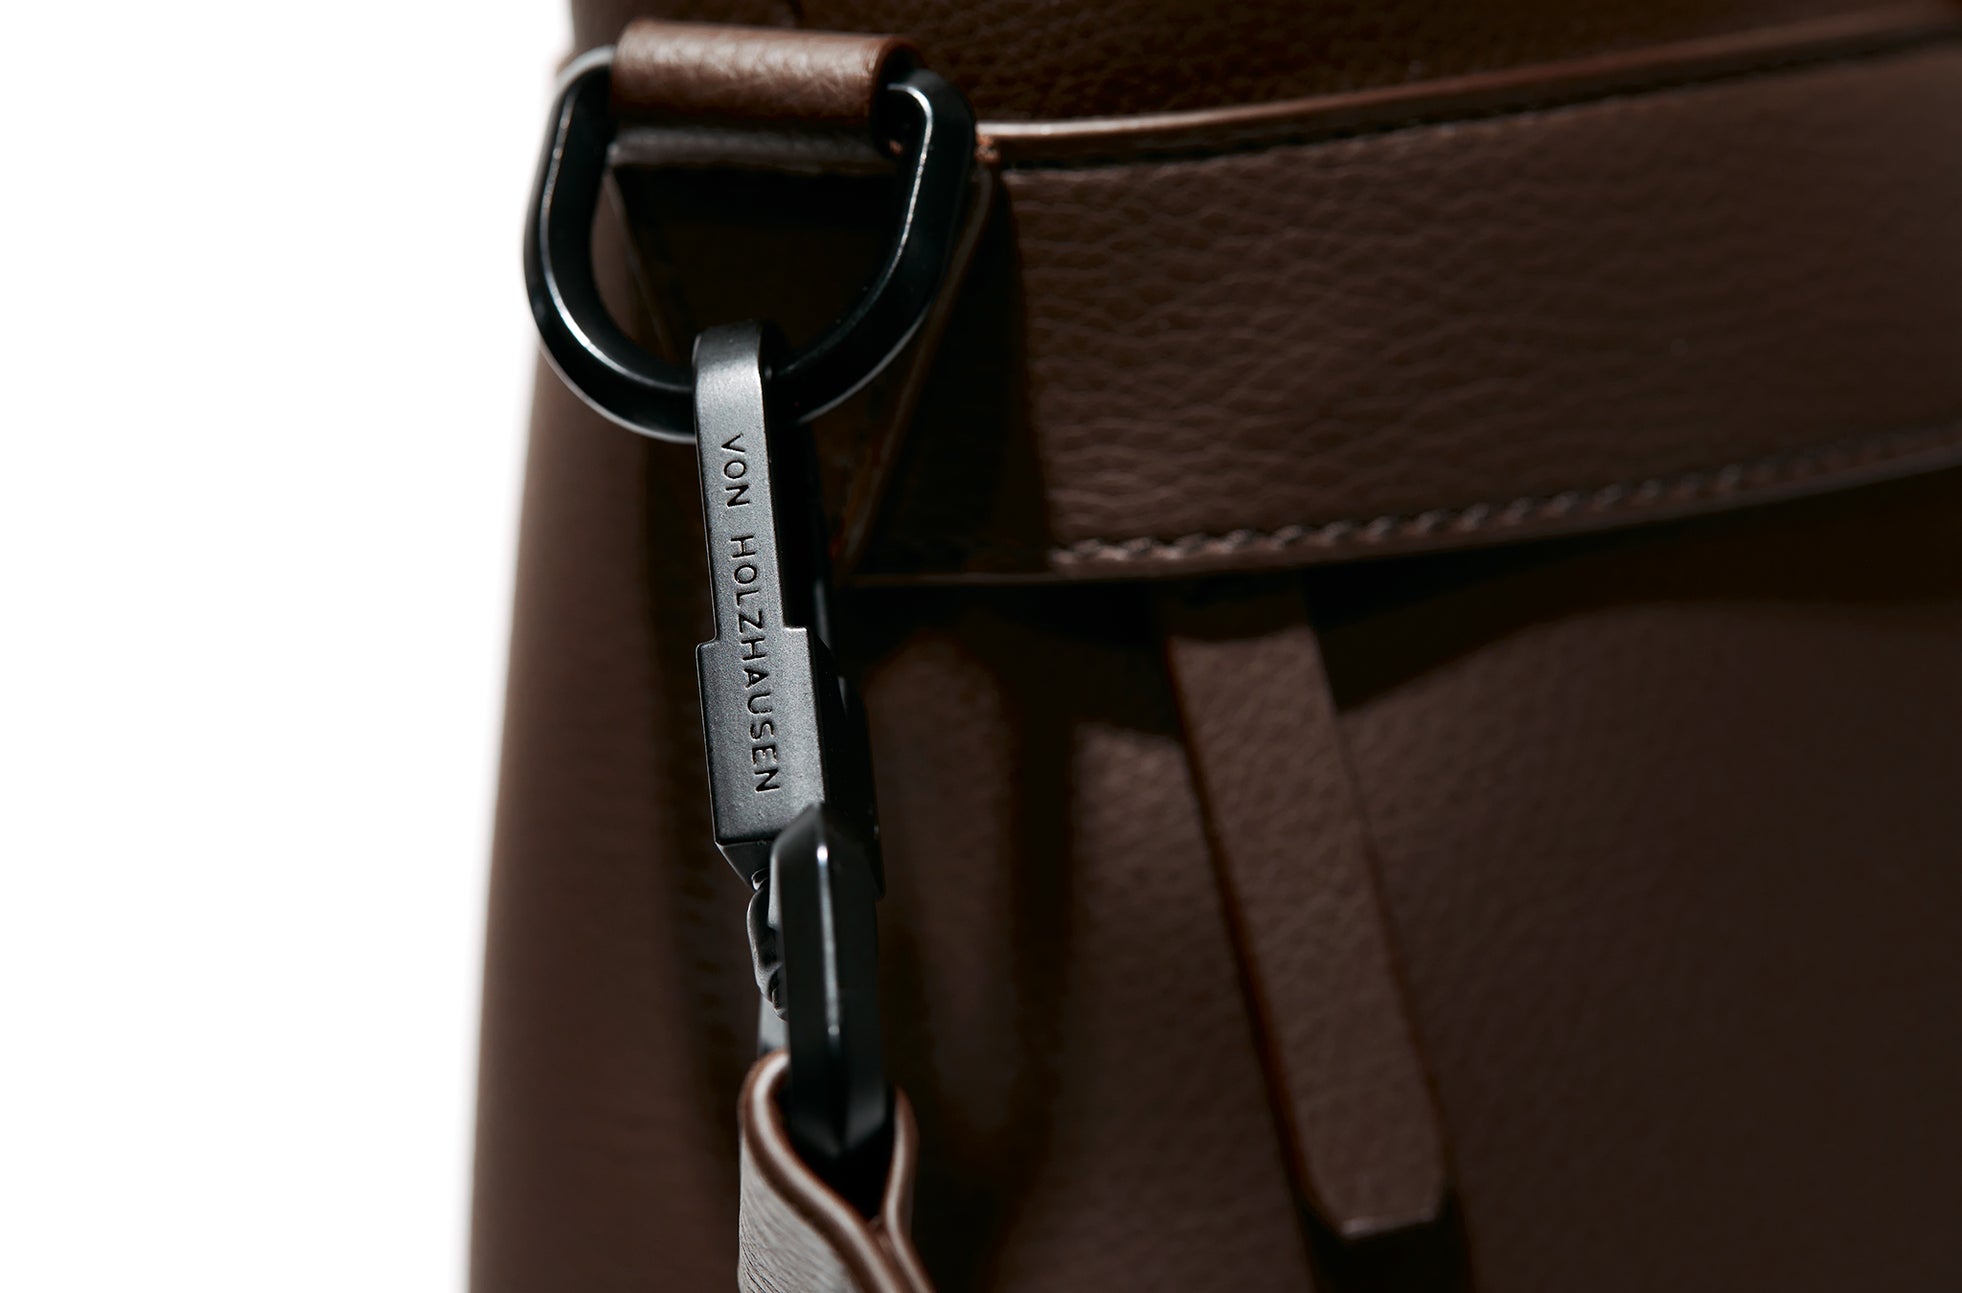 The Zipper Tote in Technik-Leather in Taupe image 9